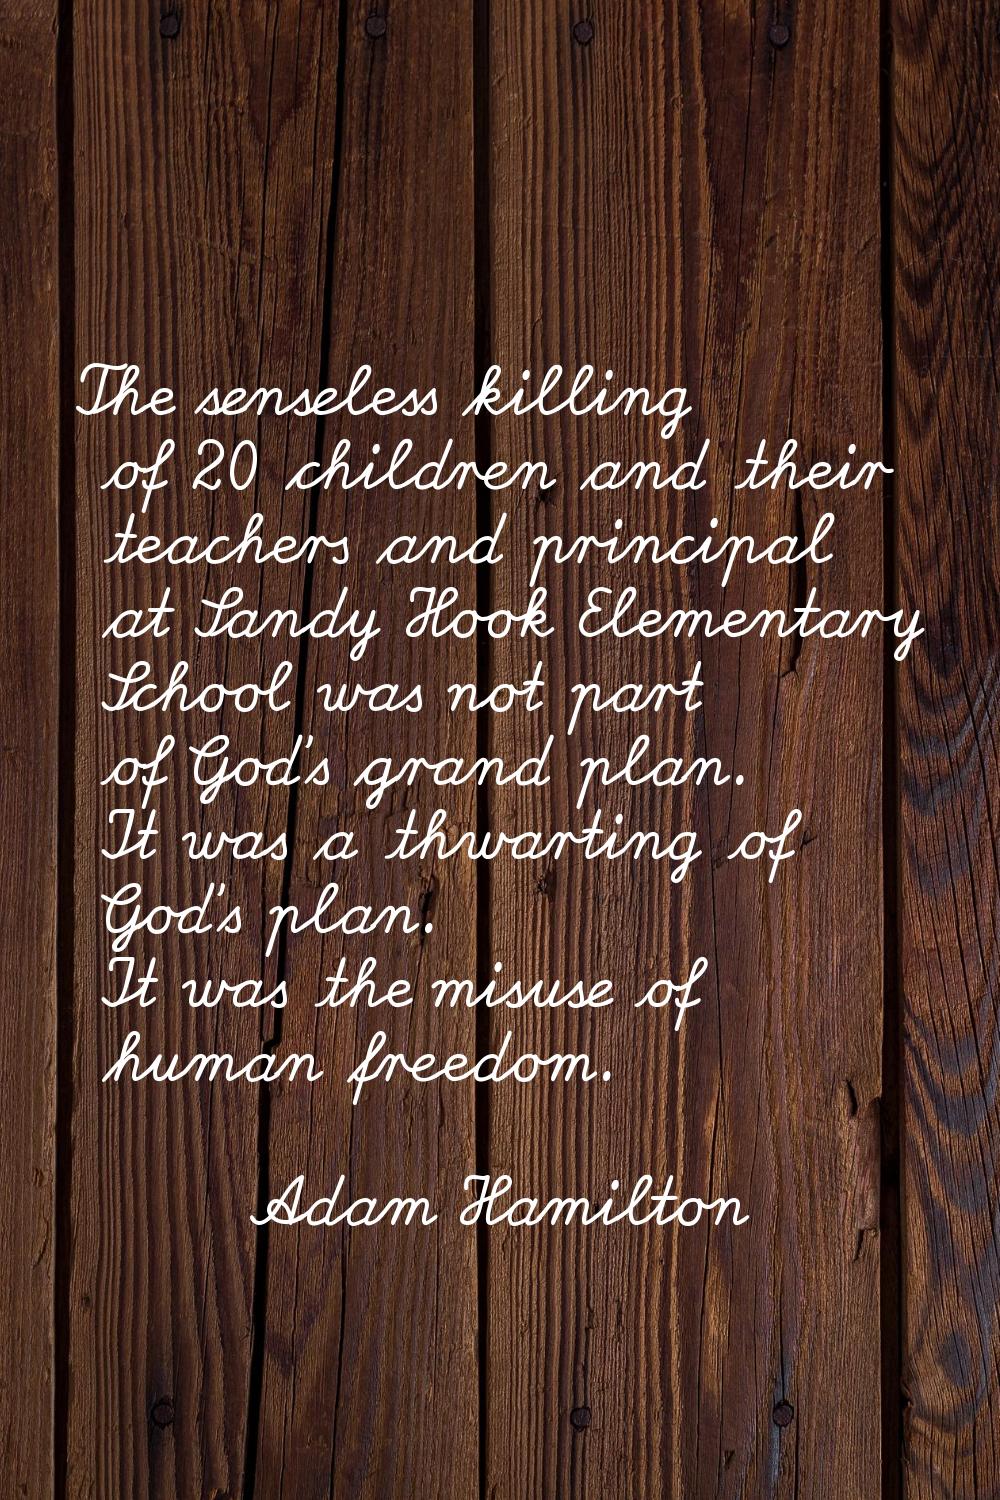 The senseless killing of 20 children and their teachers and principal at Sandy Hook Elementary Scho